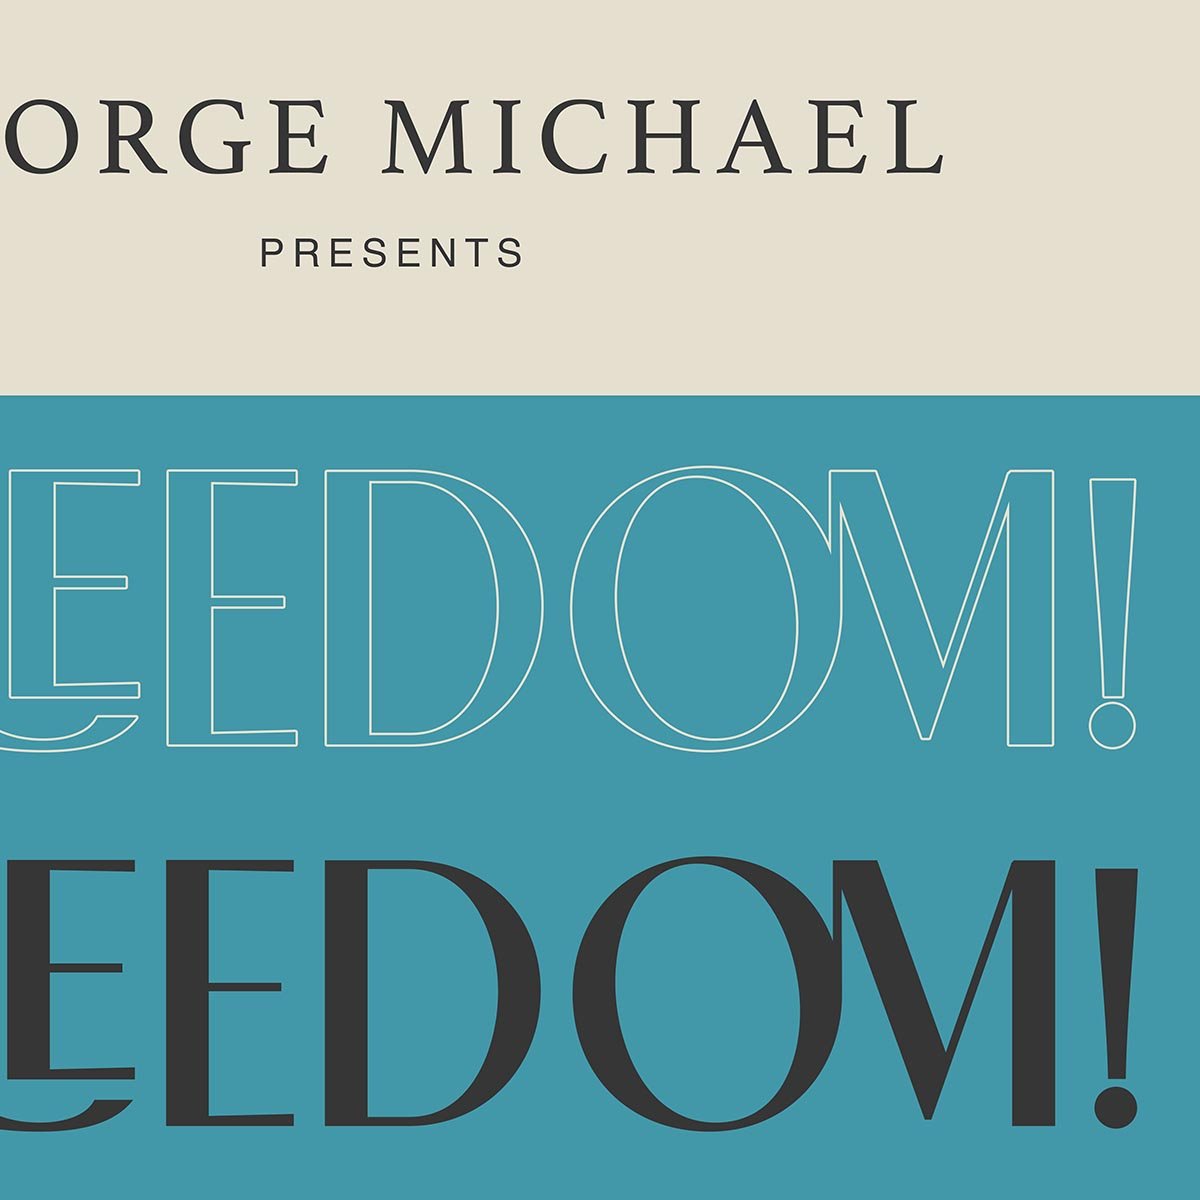 Freedom by George Michael